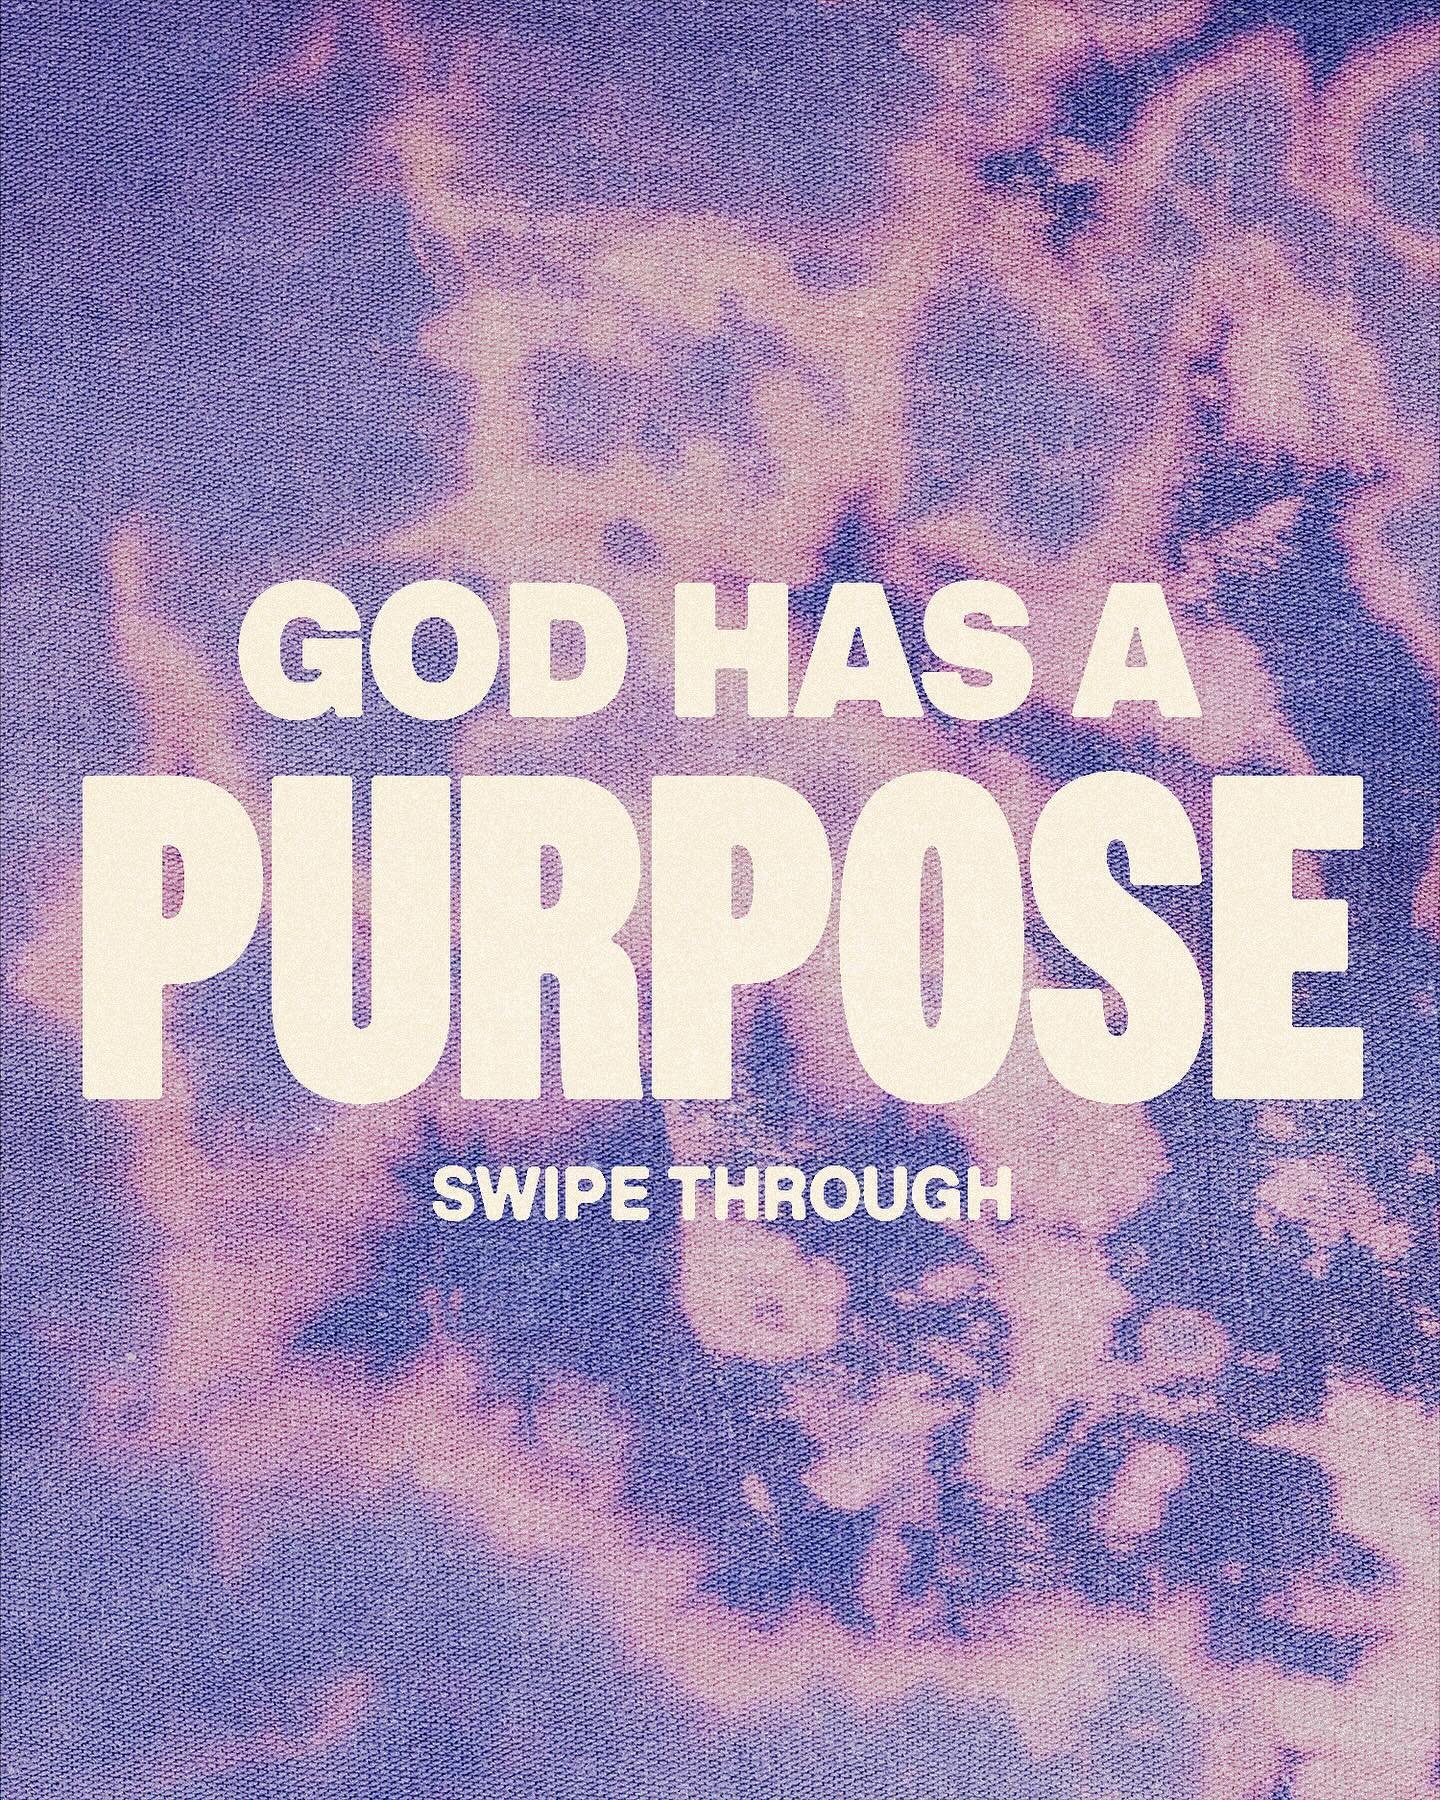 It doesn&rsquo;t matter who you are or where you&rsquo;re from, God has a purpose for you!
&bull;
Swipe through ➡️